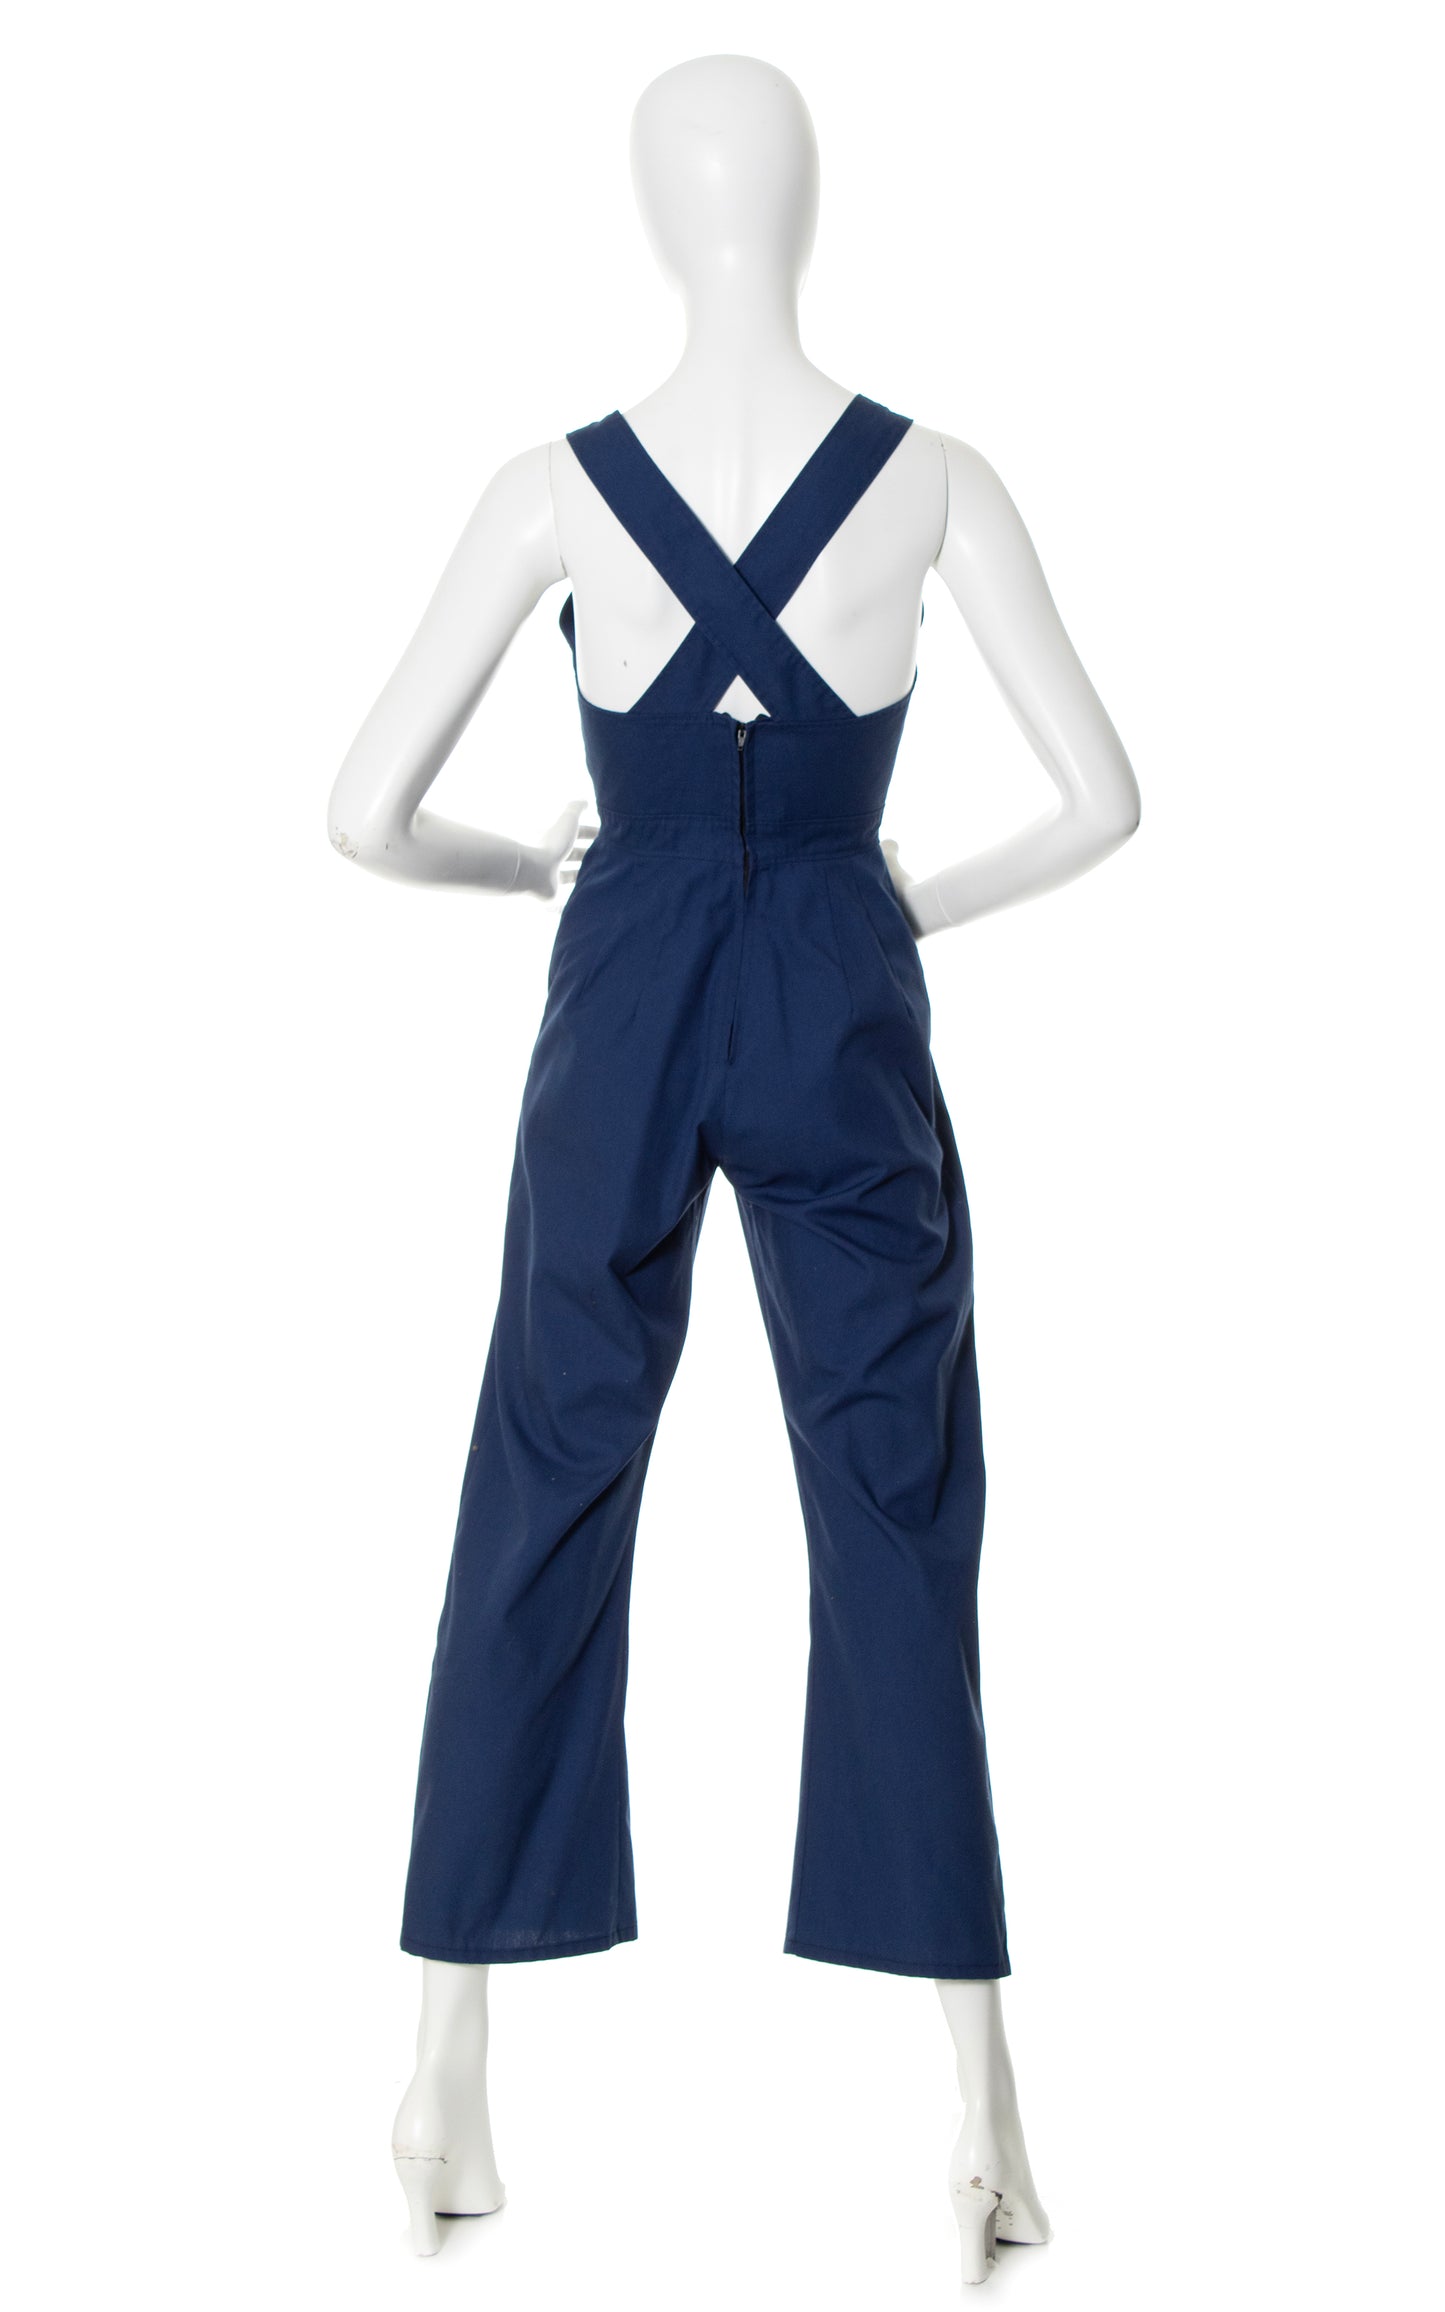 NEW ARRIVAL || 1970s Criss-Cross Straps Cotton Jumpsuit | x-small/small